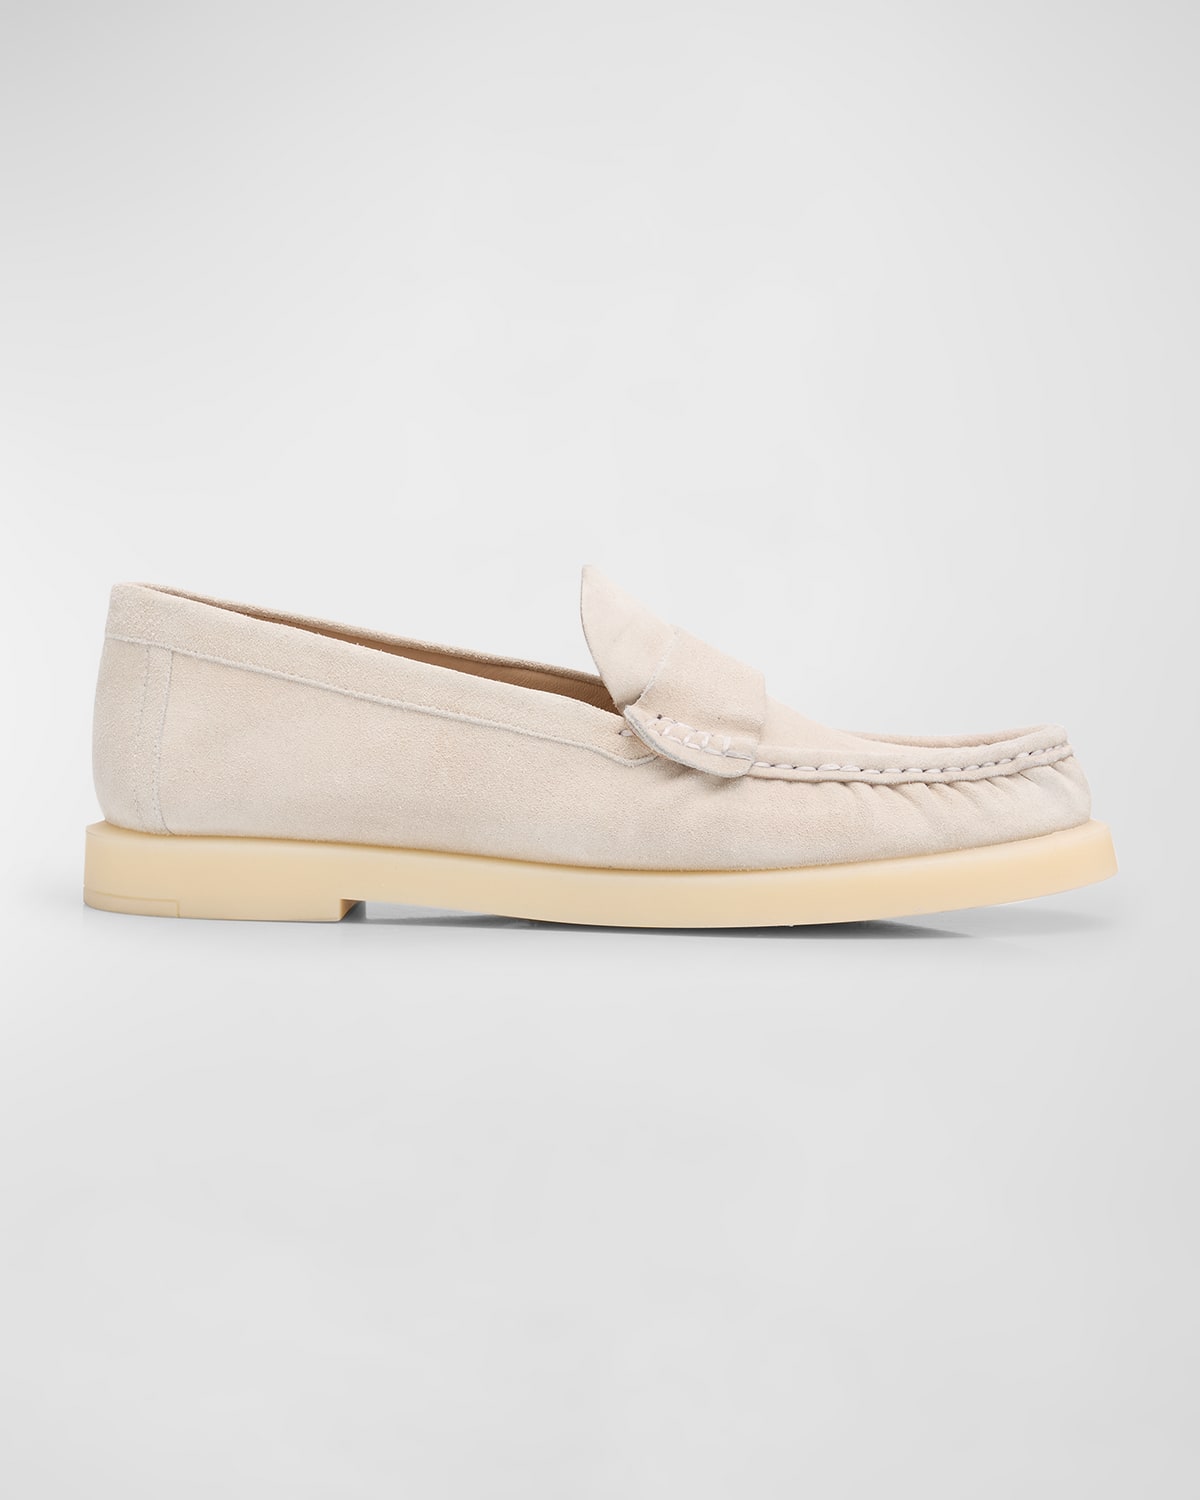 Blake Luxe Suede Slip-On Loafers